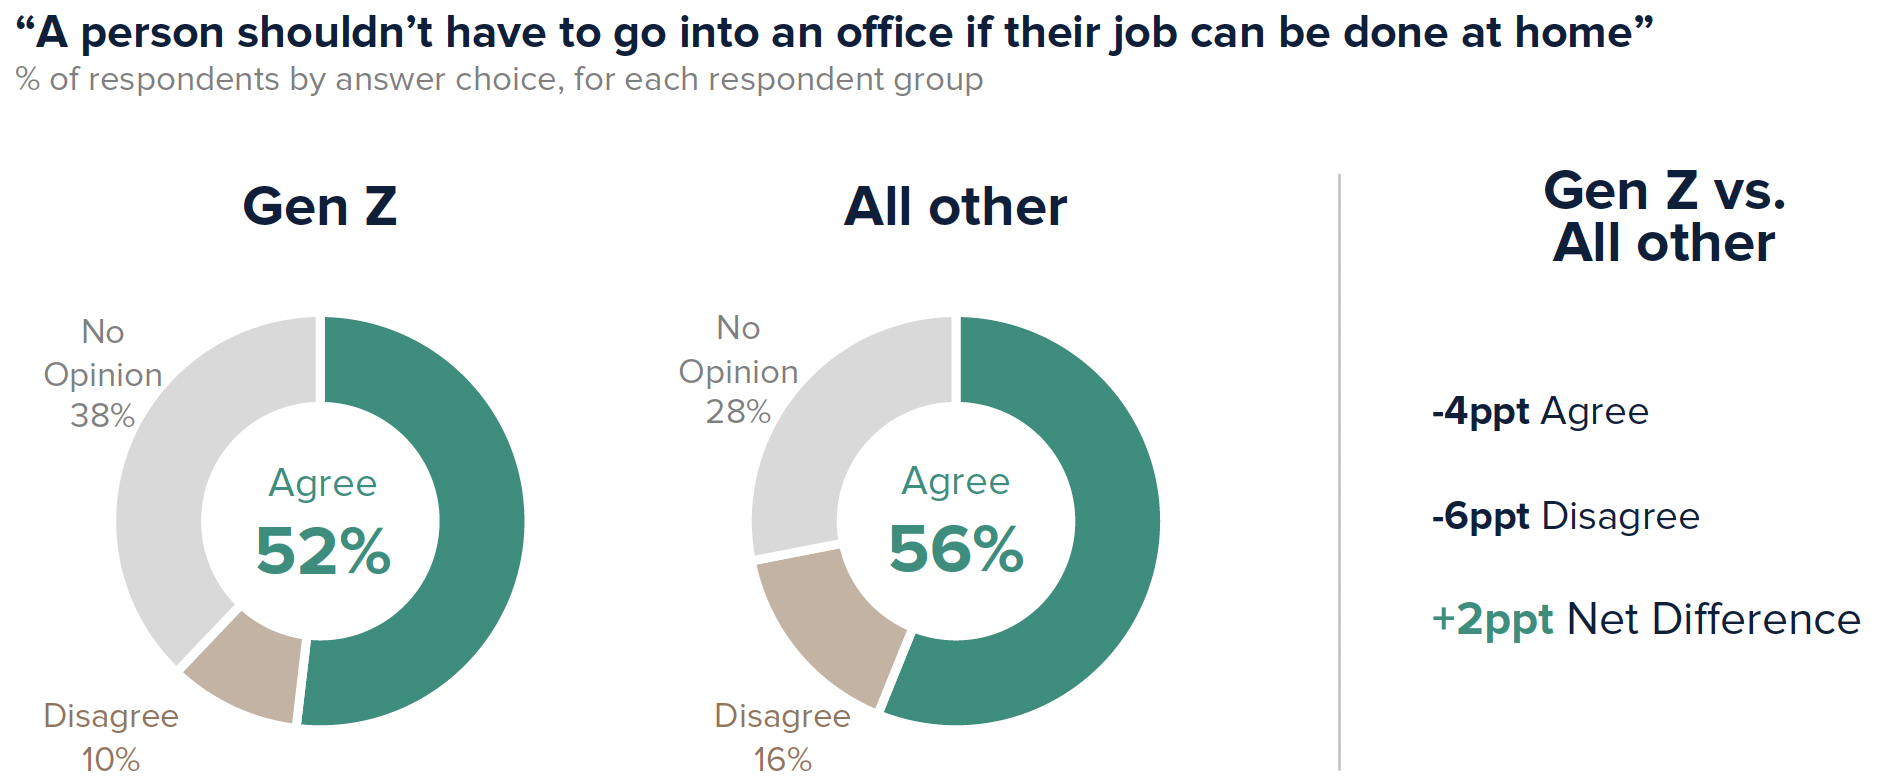 Gen Z is slightly less likely to agree that “a person shouldn’t have to go into an office if their job can be done at home” (52% vs 56%)